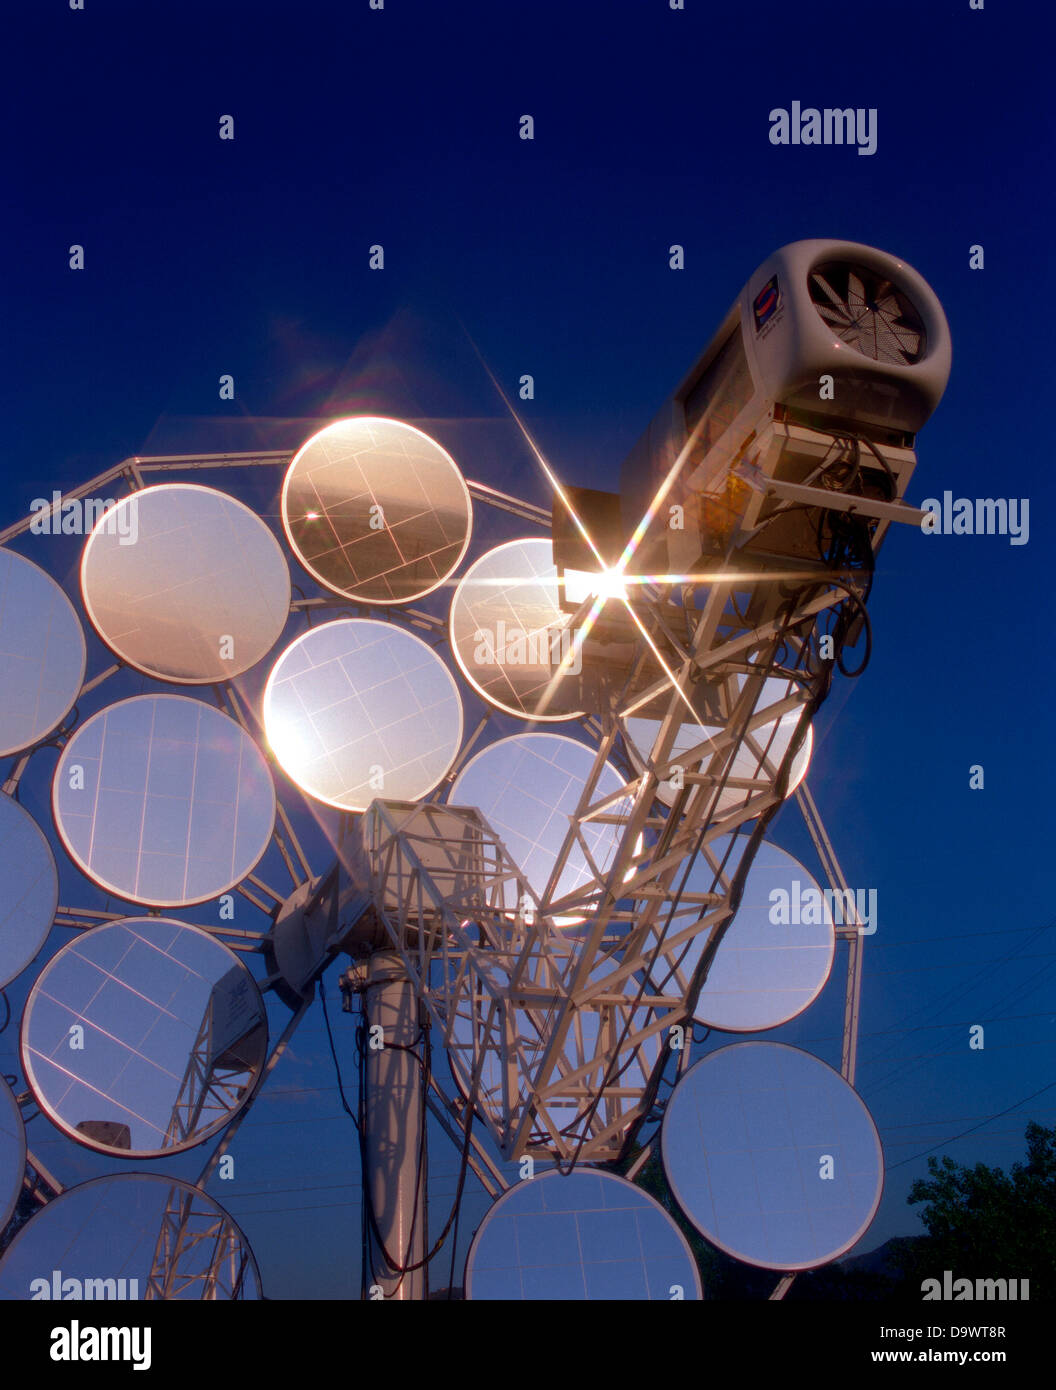 Stirling Solar power systems solar dish engine June 12, 1996 in Golden, Colorado. The dish produces electricity uses mirrors to focus sunlight onto a thermal receiver. The heat is used to run a Stirling heat engine, which drives an electric generator. Stock Photo